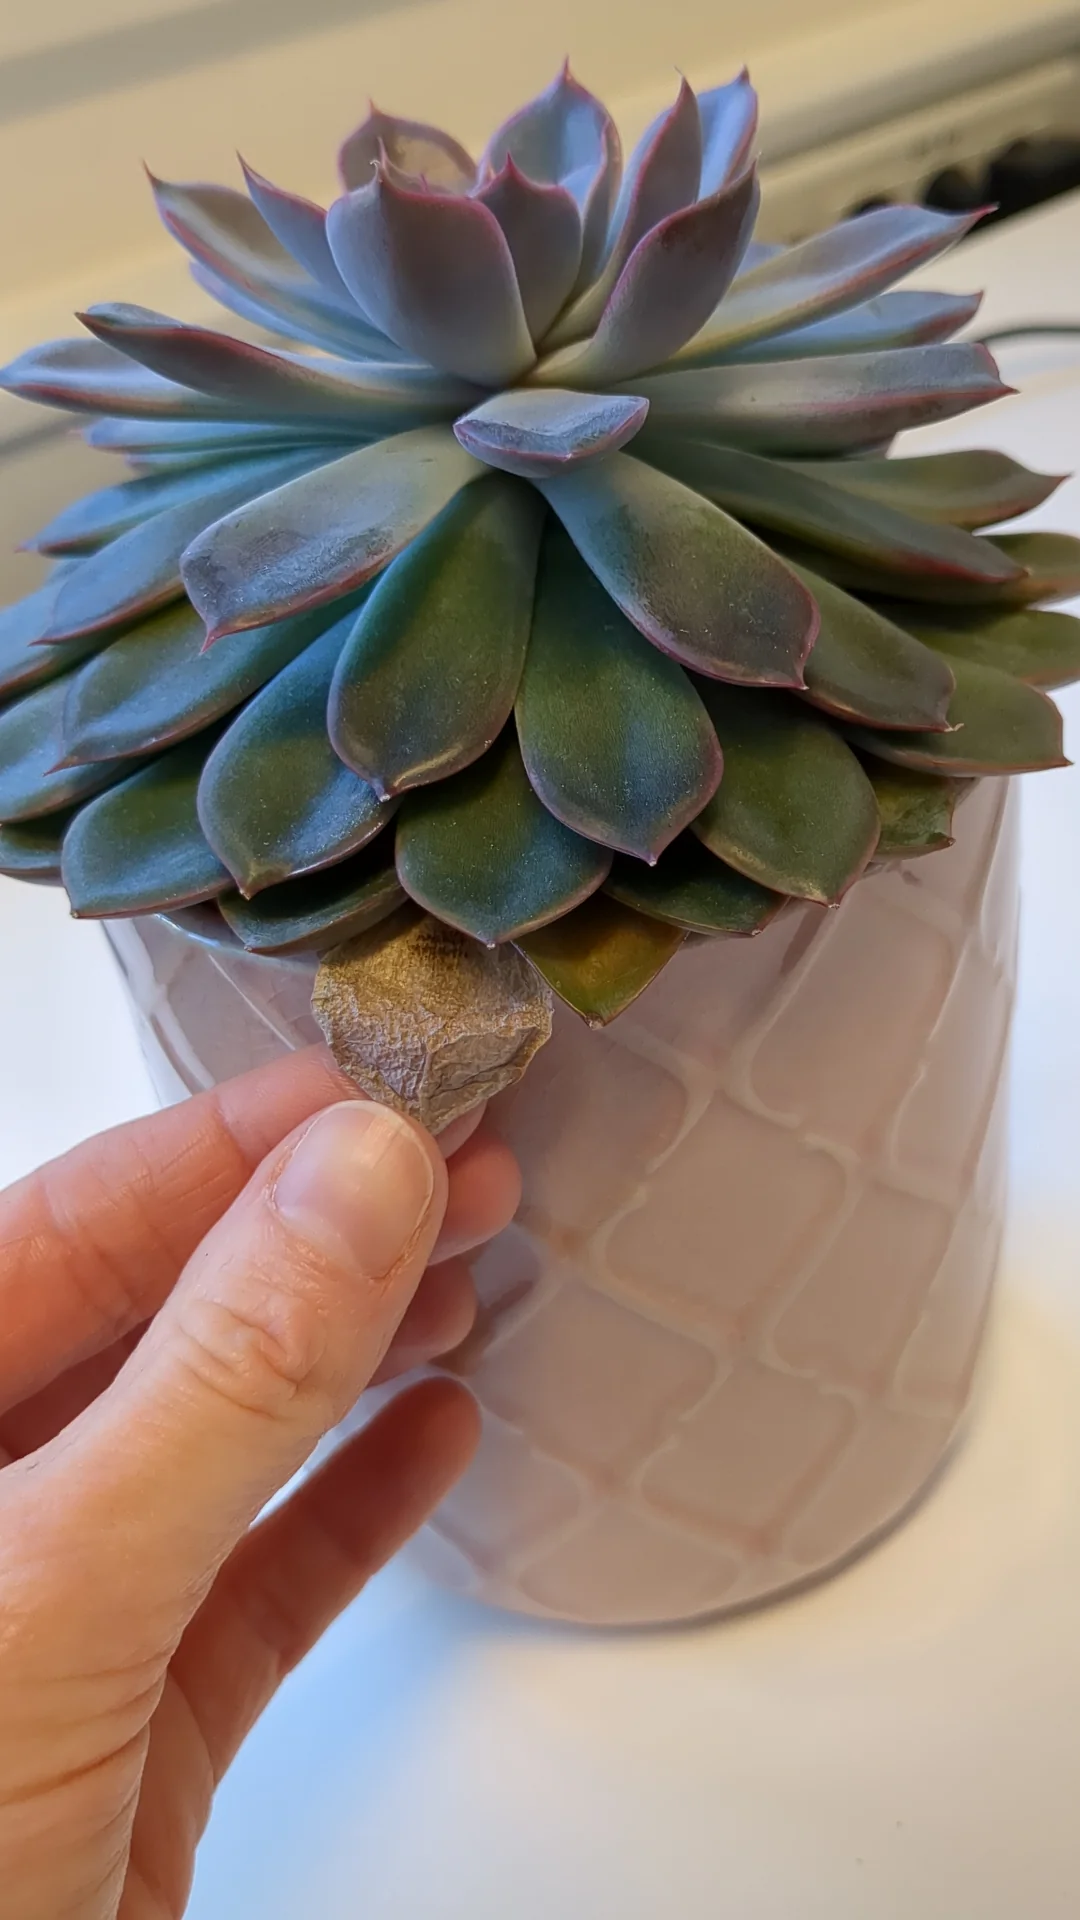 A person gently holds a small succulent plant in a pot. The plant is an echeveria agavoides, known for its grooming and maintenance needs.